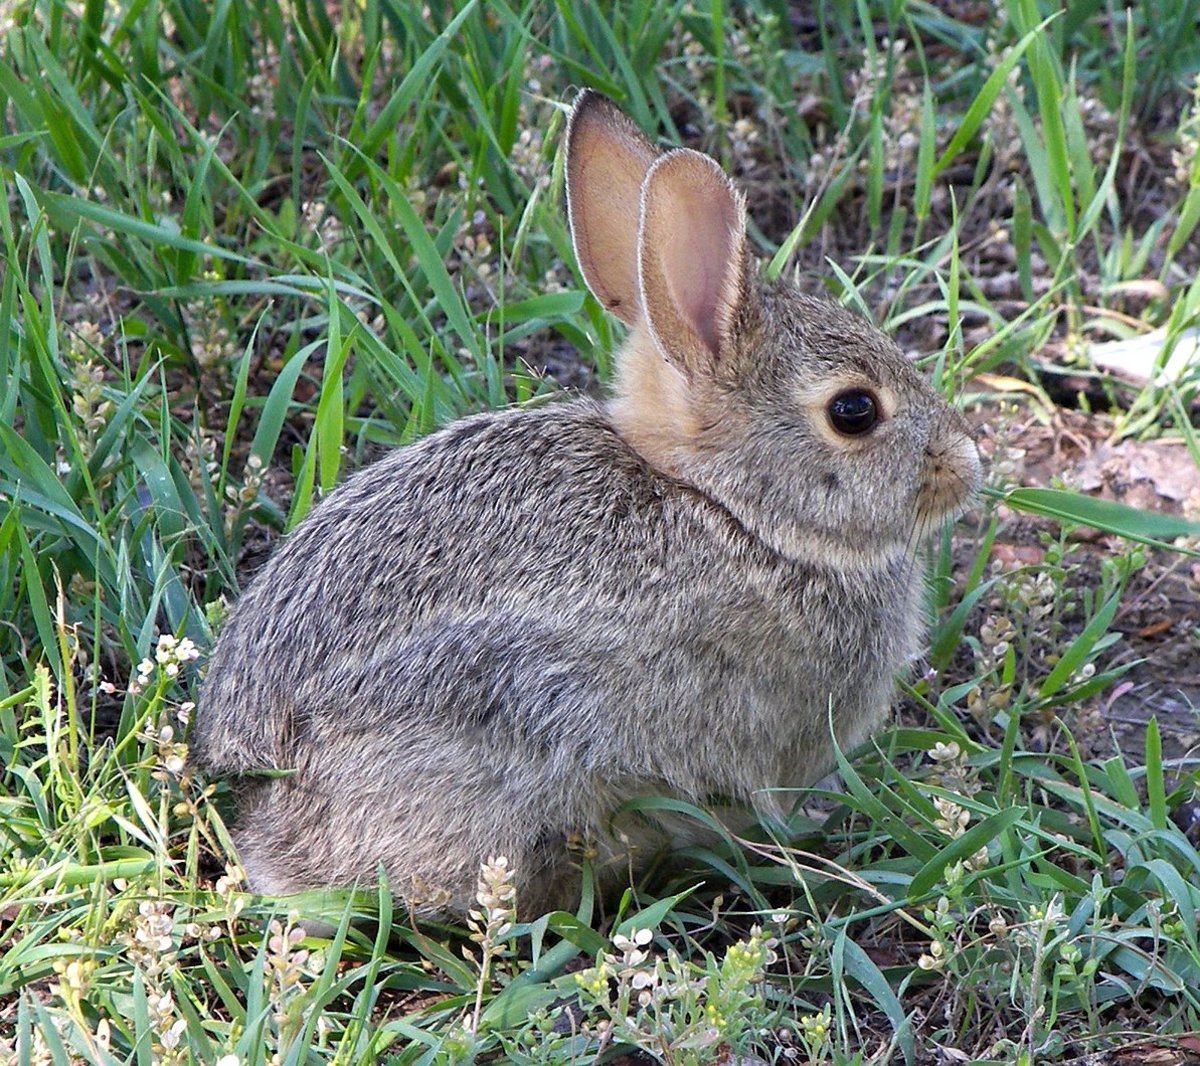 How to Keep Rabbits Out of the Garden | hubpages